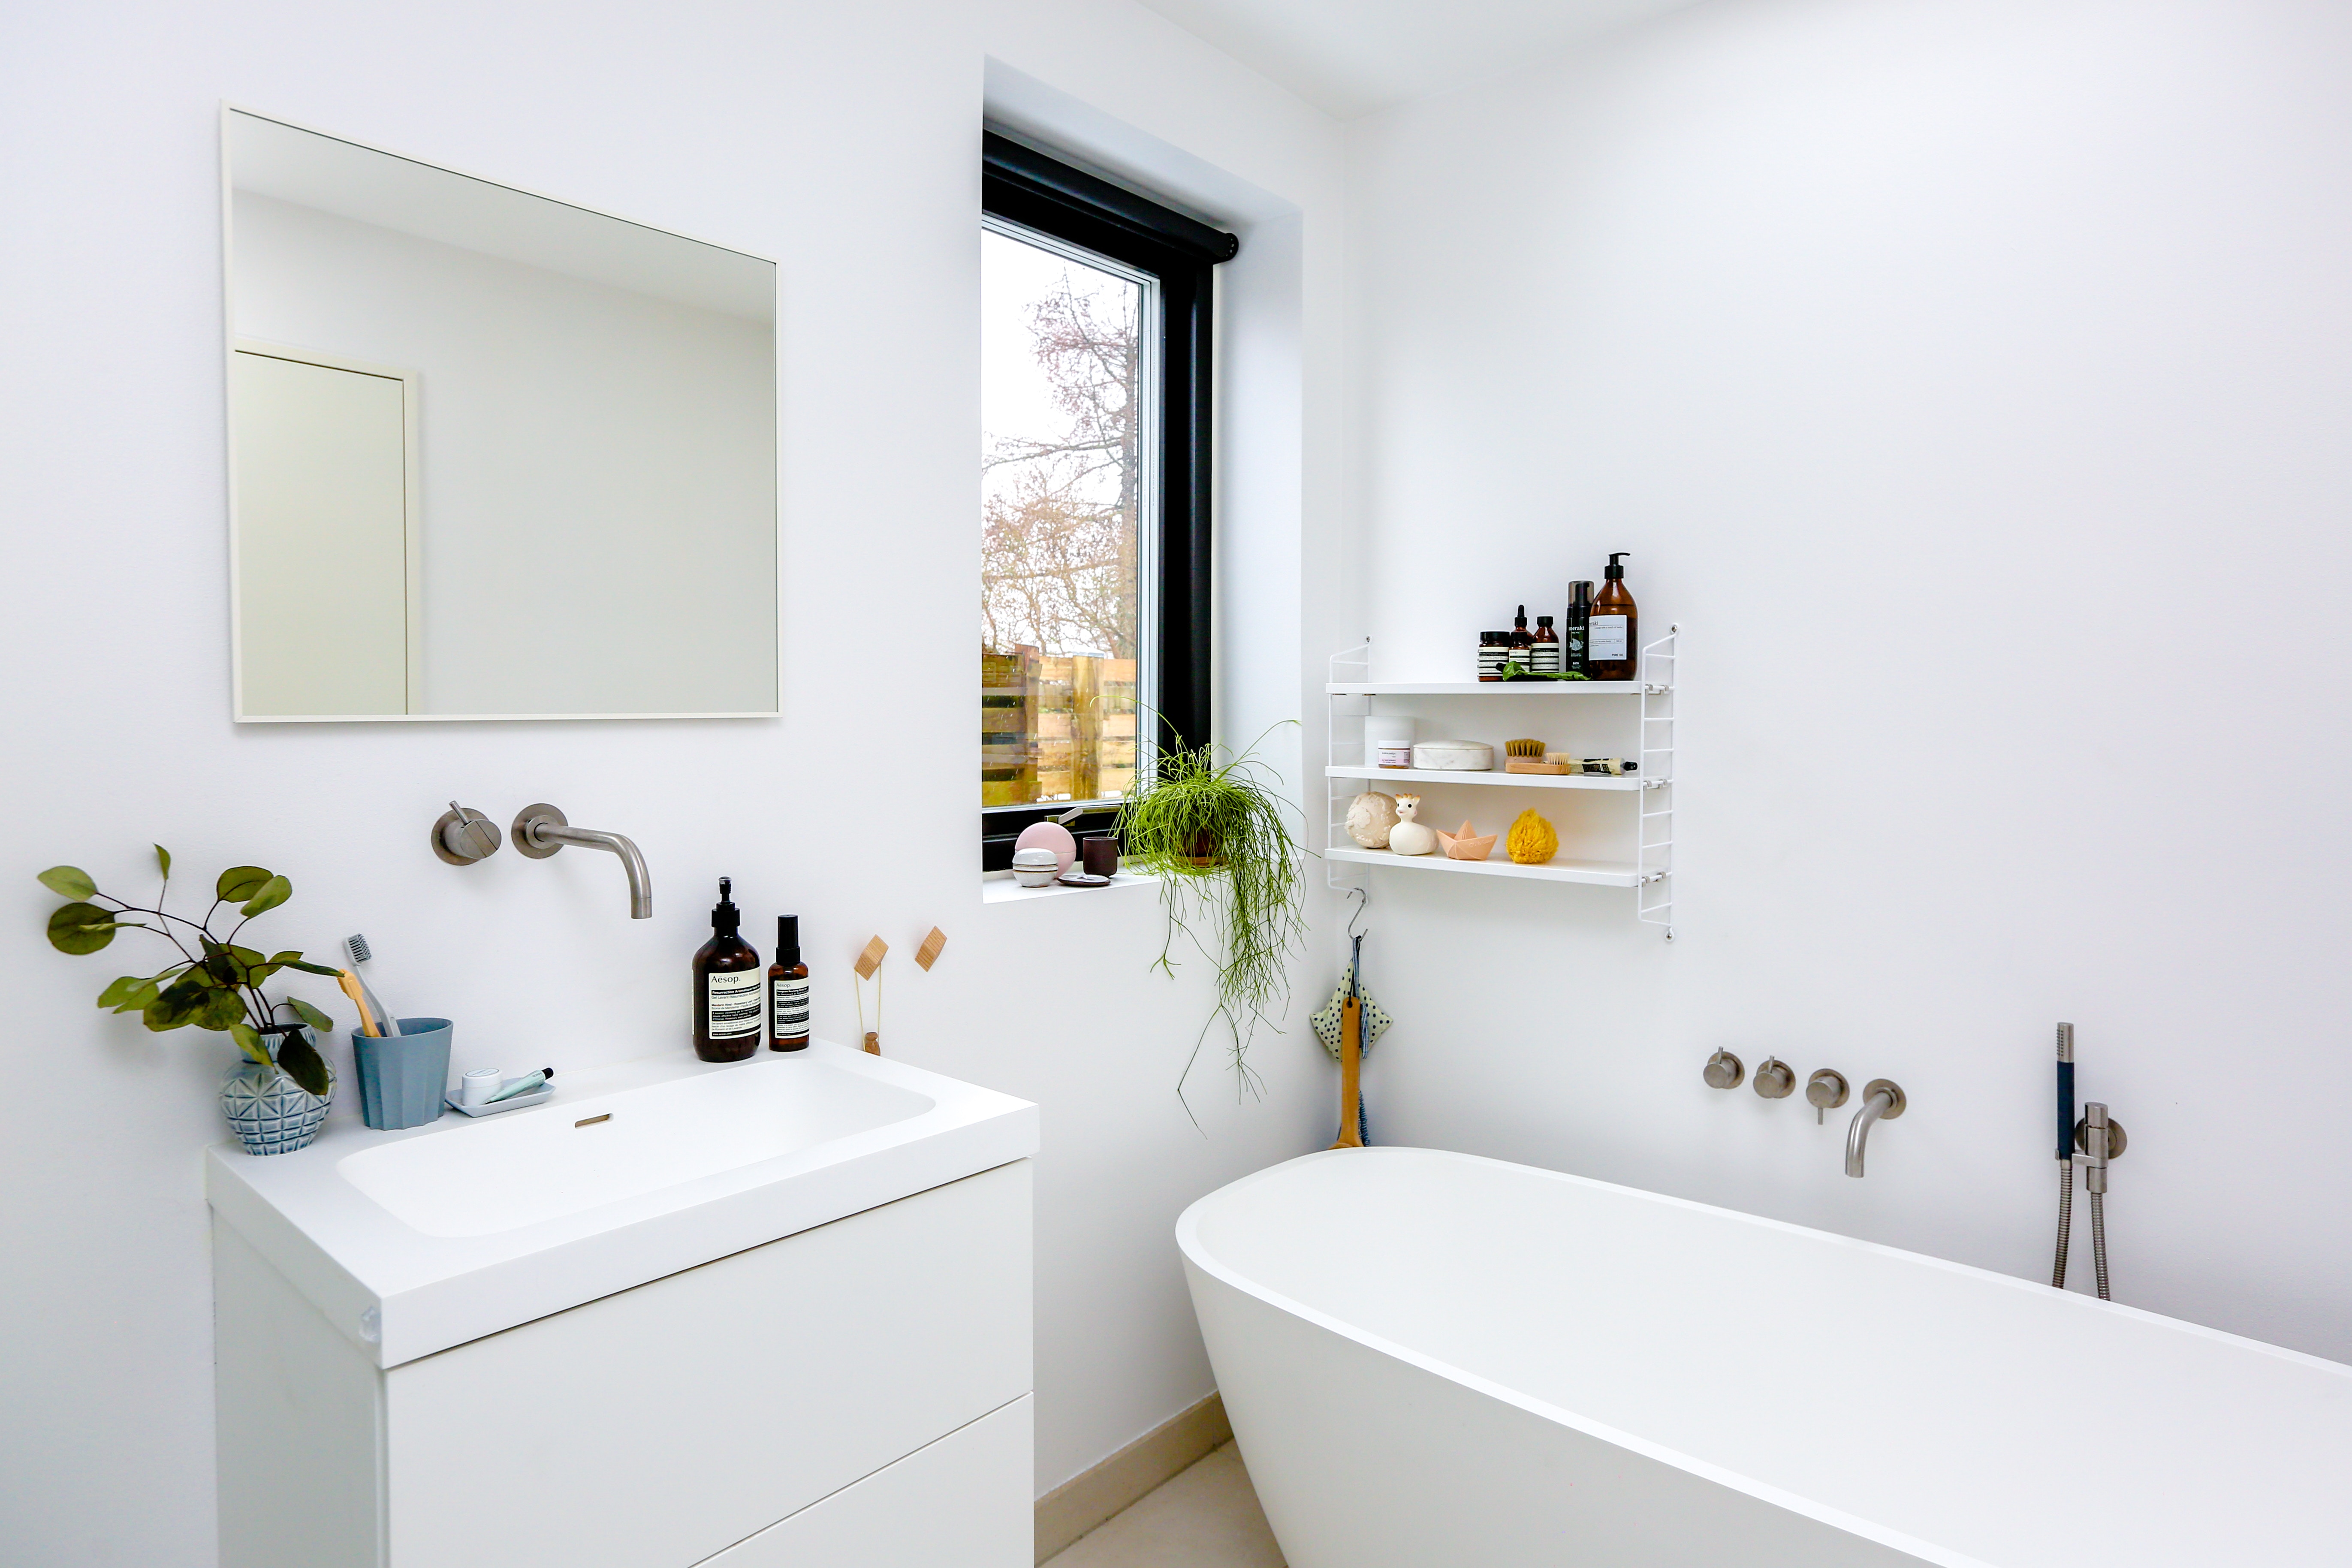 5 steps to creating your dream bathroom